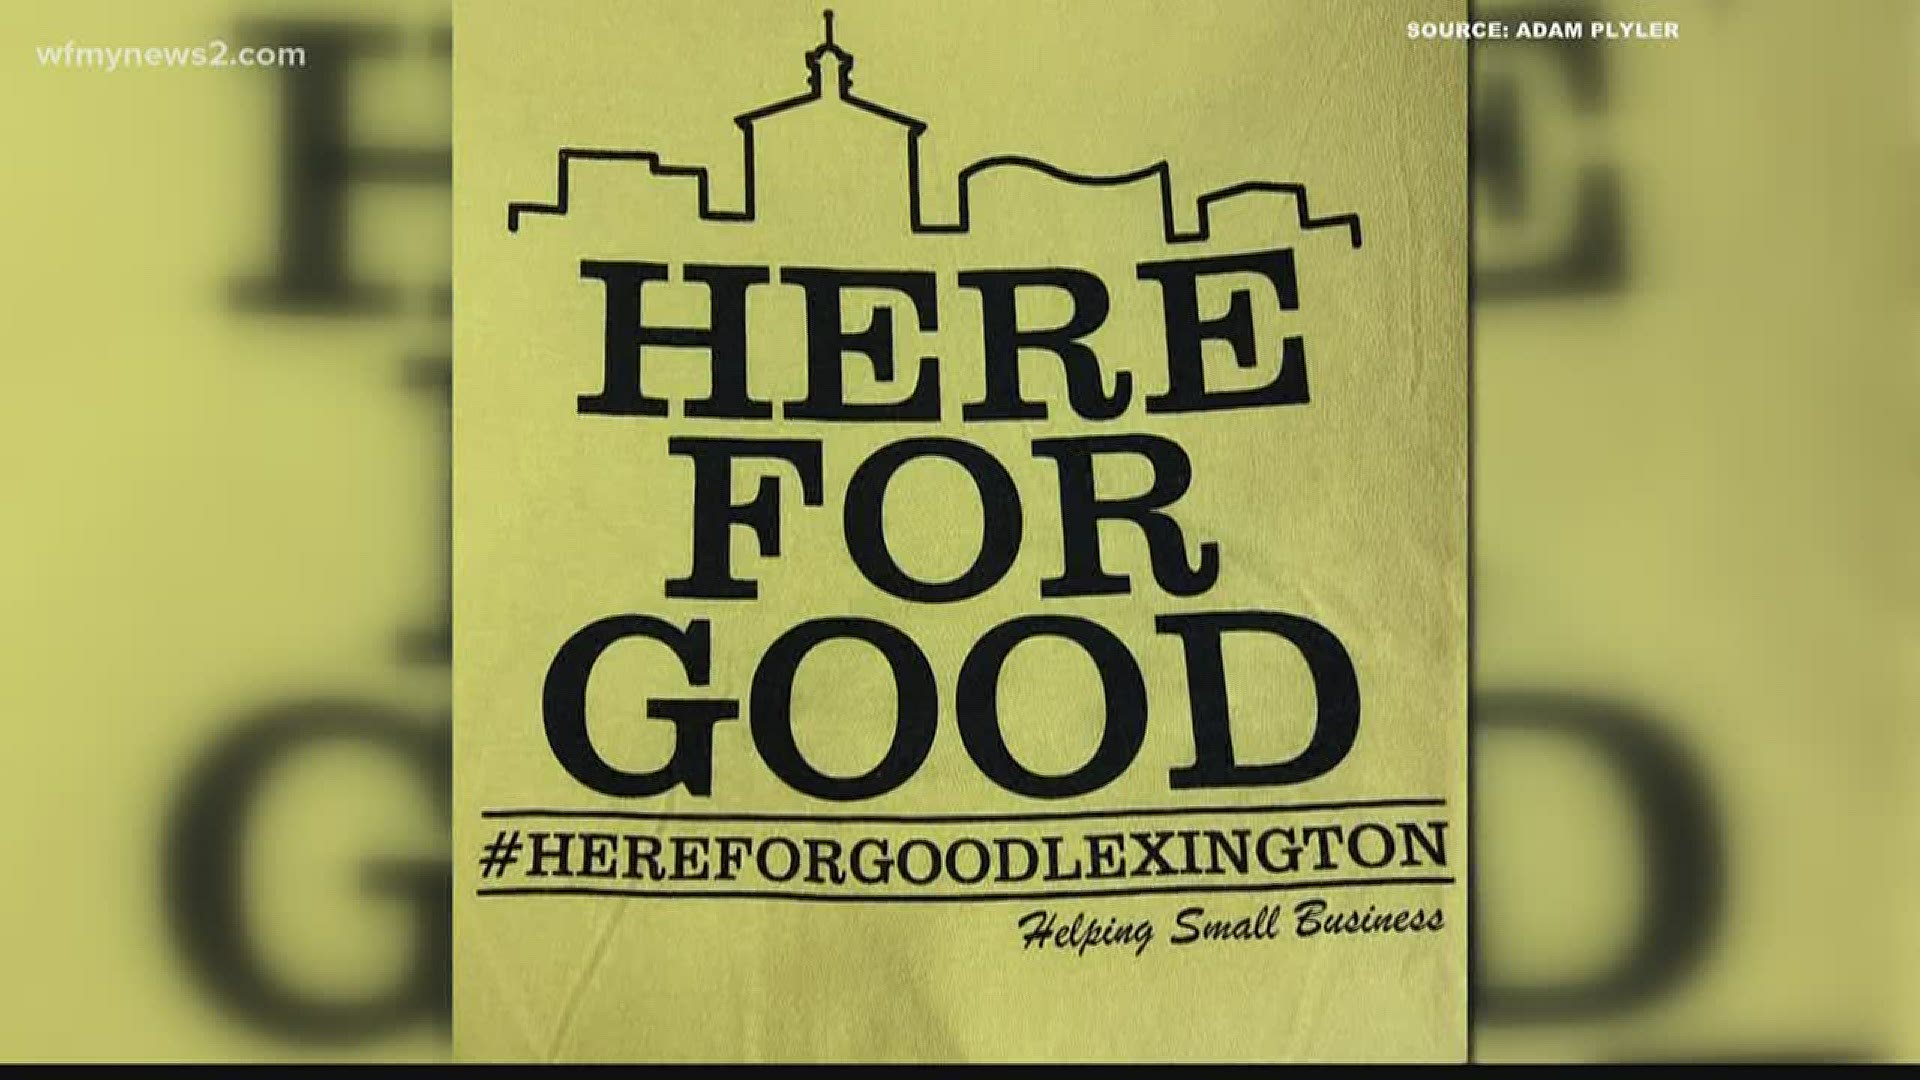 A small business owner in Lexington started “Here for Good.” The campaign is to remind people small businesses are there for the community during the pandemic.